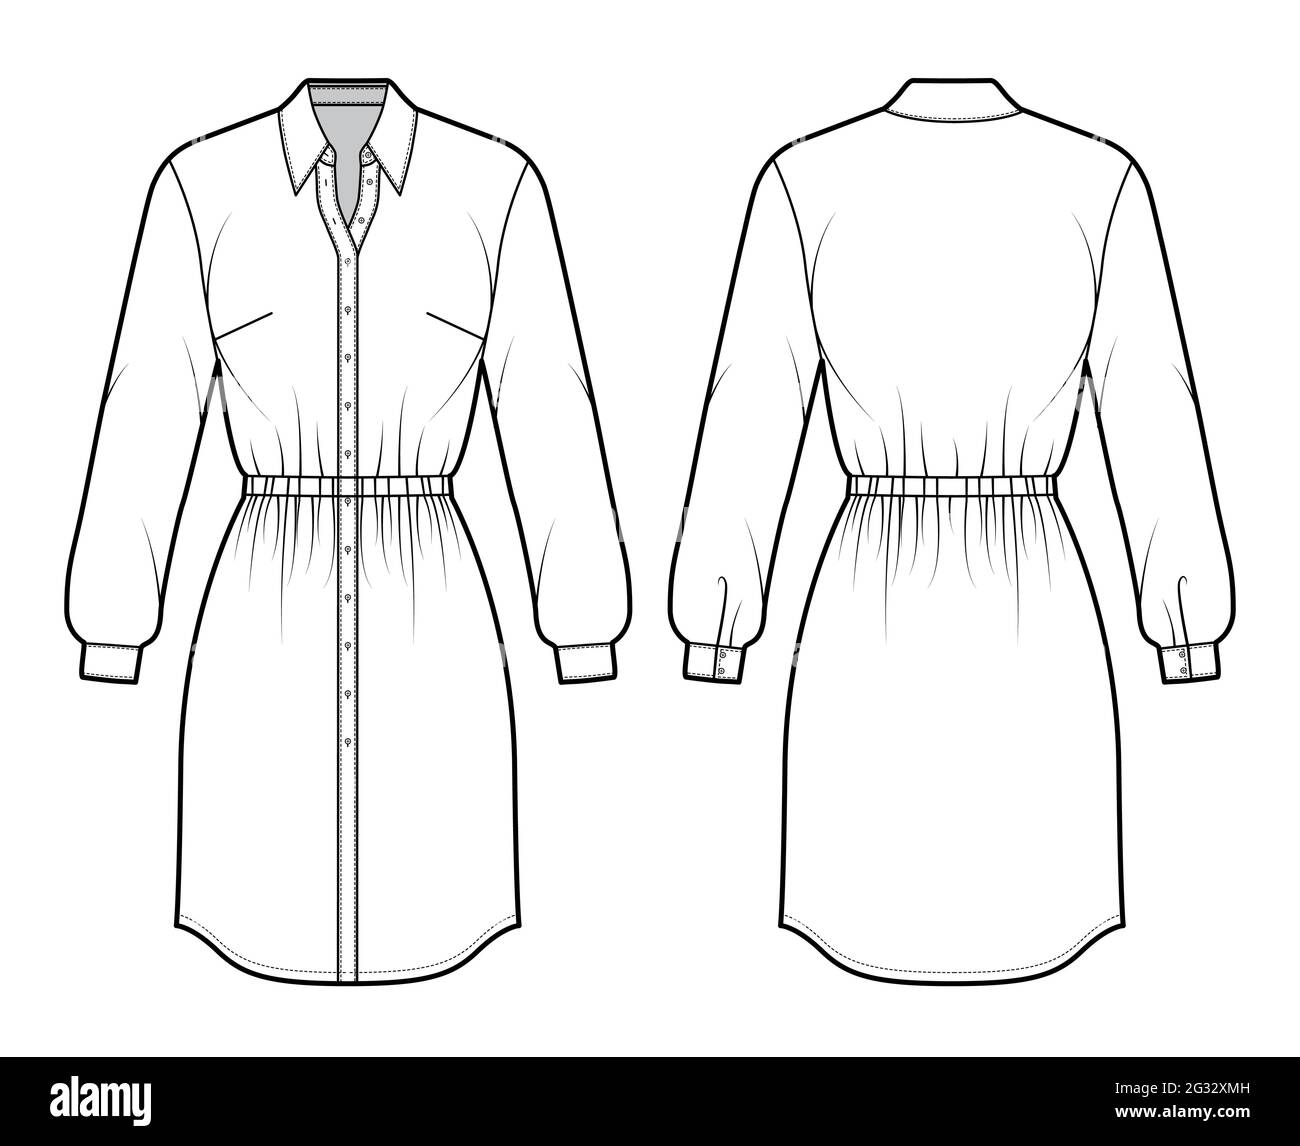 Dress shirt technical fashion illustration with gathered waist, long sleeves, fitted, pencil skirt, classic collar, button closure. Flat apparel front, back, white color style. Women, men unisex CAD Stock Vector